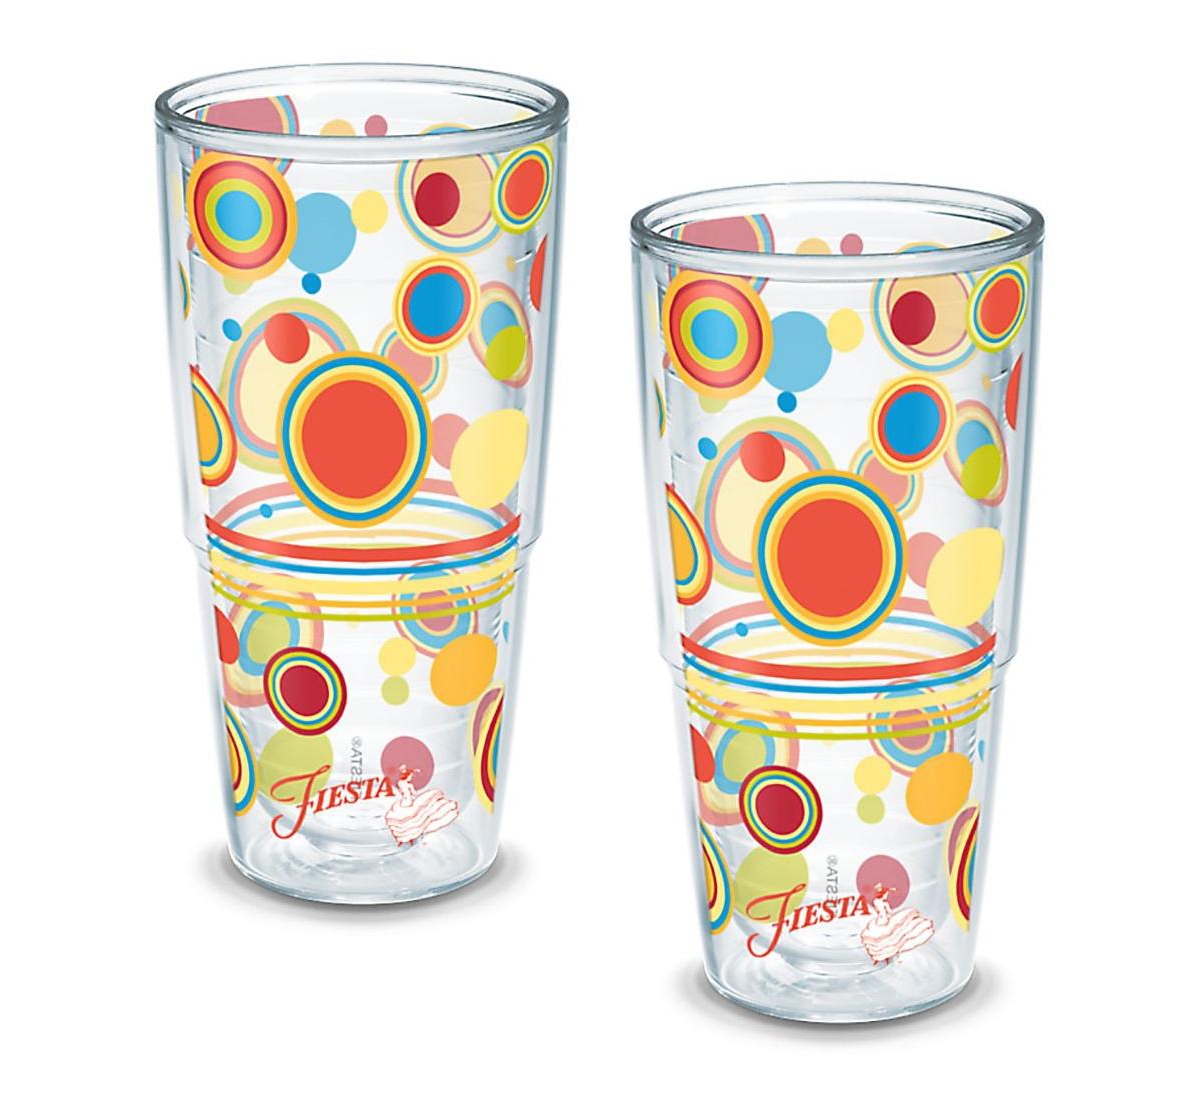 Tervis Tumbler Tervis Fiesta Poppy Dots Made In Usa Double Walled Insulated Tumbler Cup Keeps Drinks Cold & Hot, 24 In Open Miscellaneous